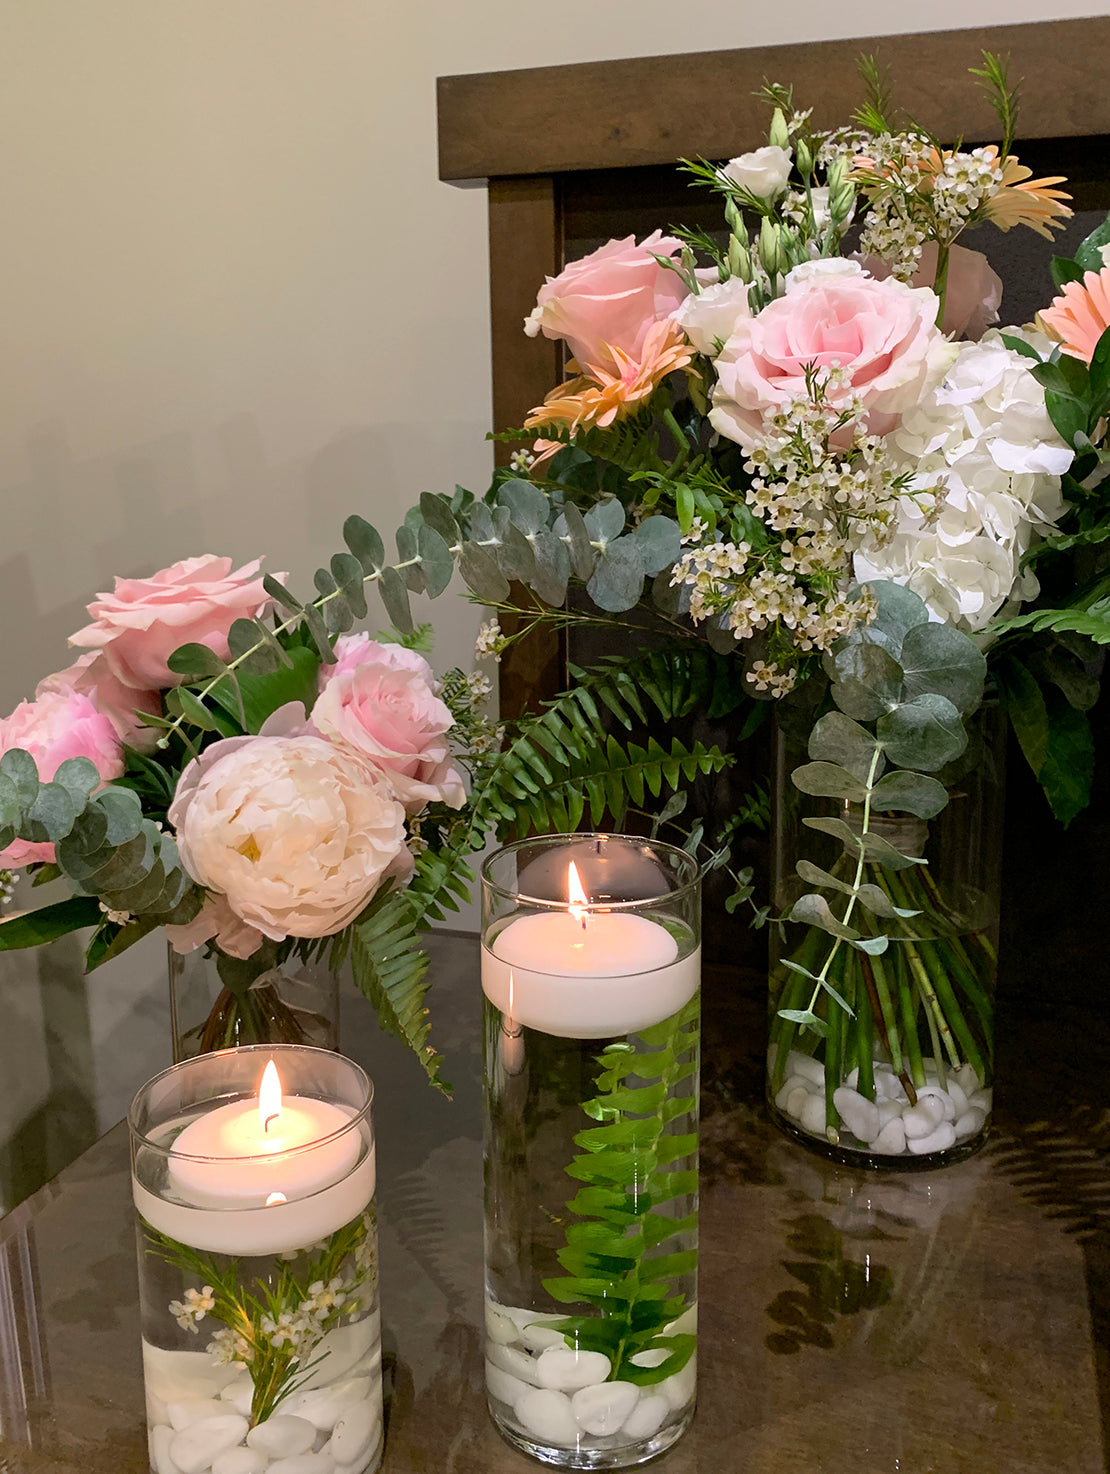 Funeral flowers filled with love